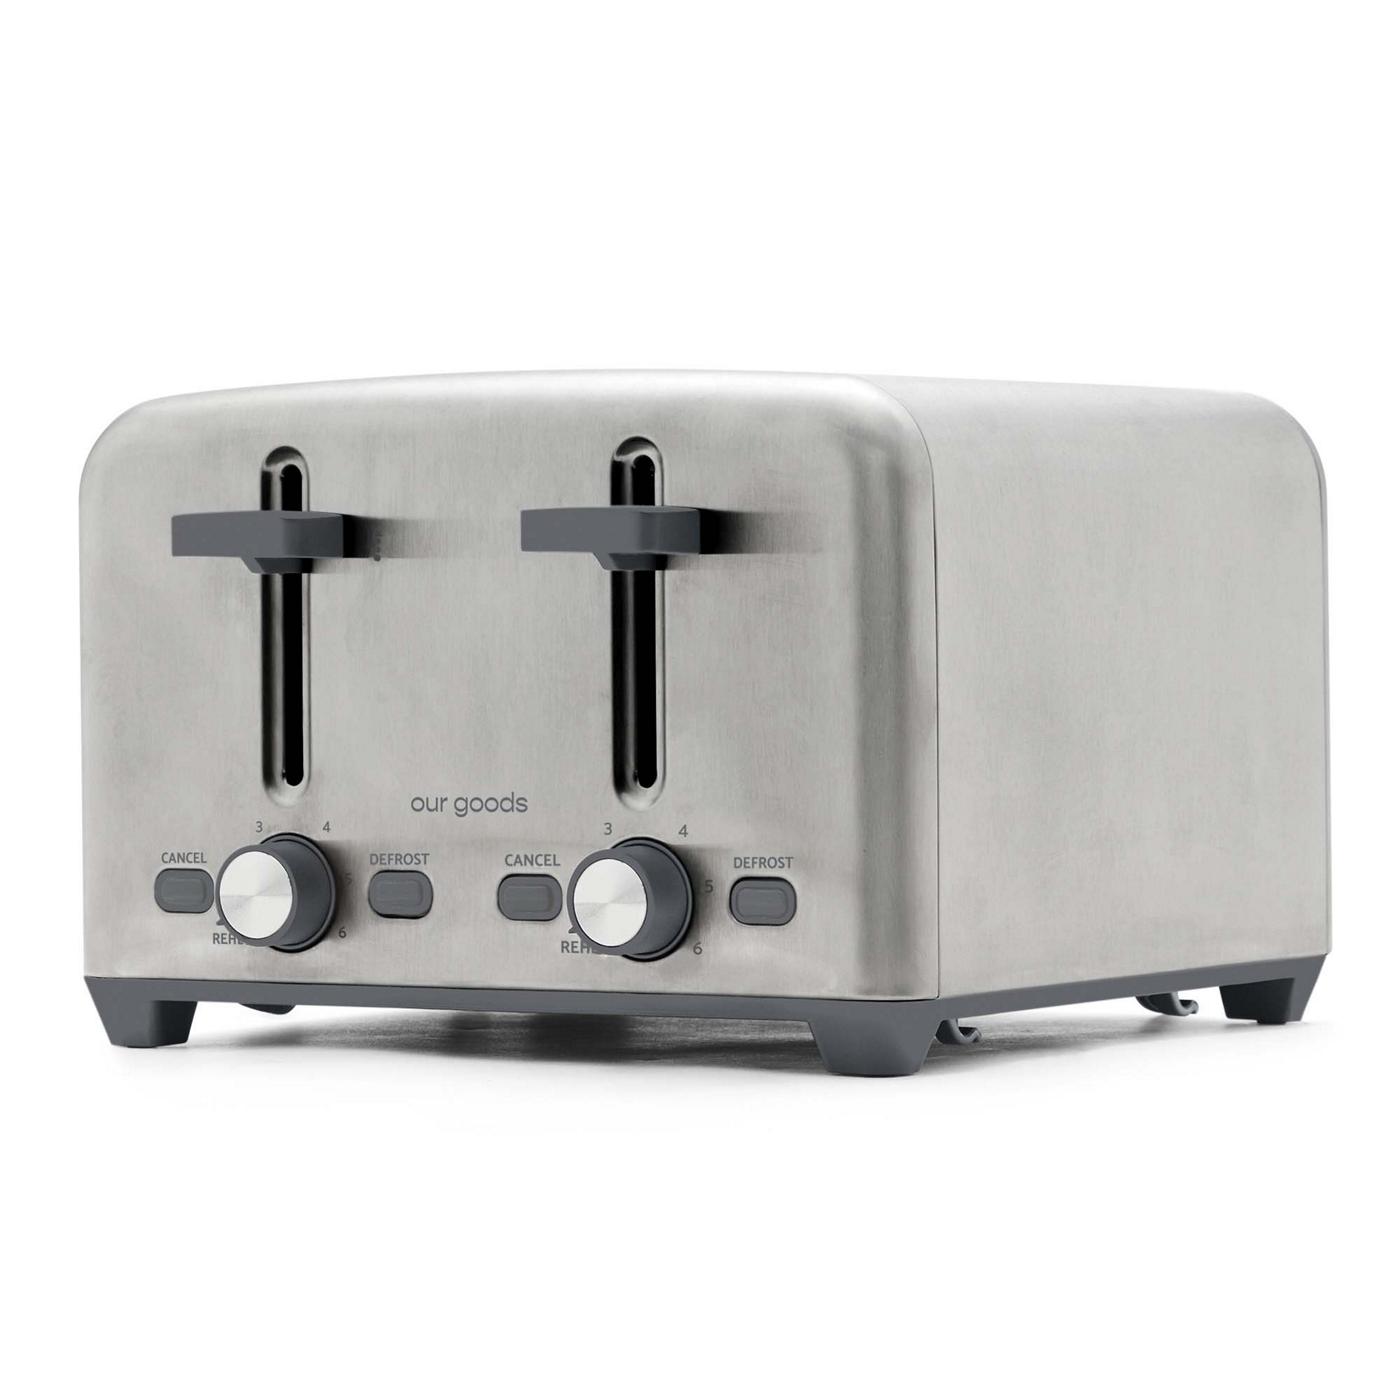 our goods 4 Slice Toaster - Stainless Steel; image 1 of 3